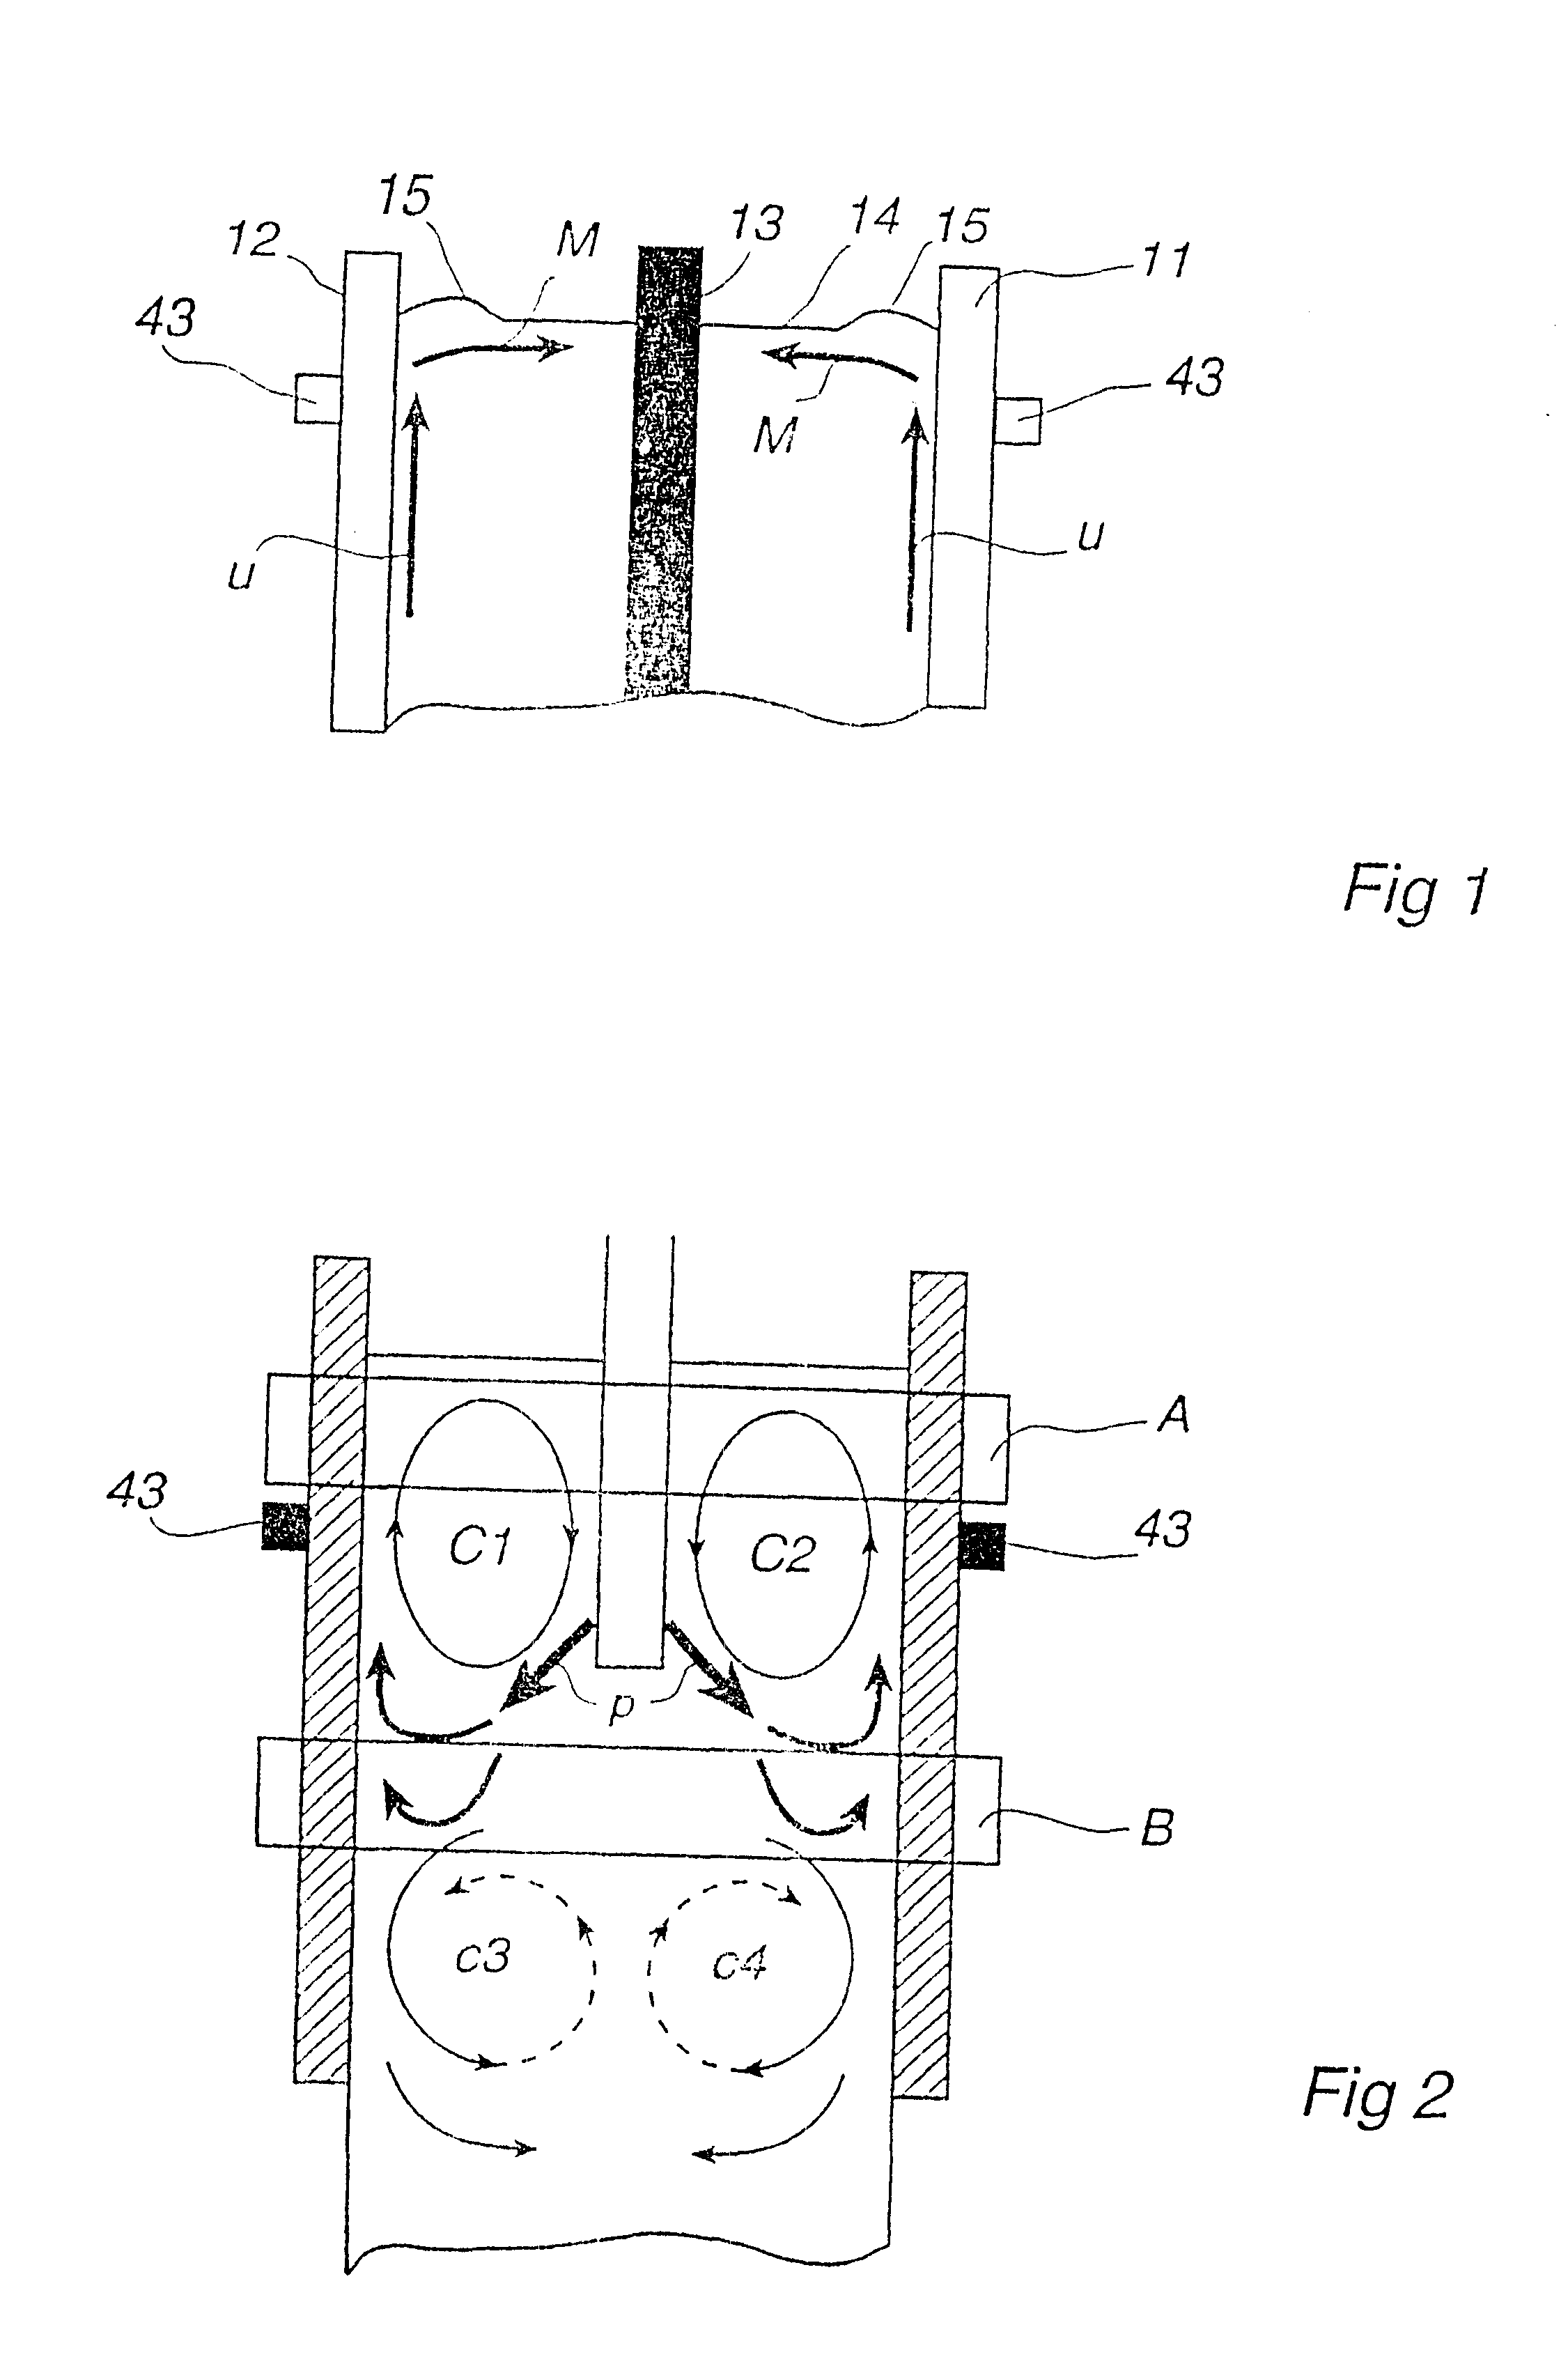 Method and device for control of metal flow during continuous casting using electromagnetic fields